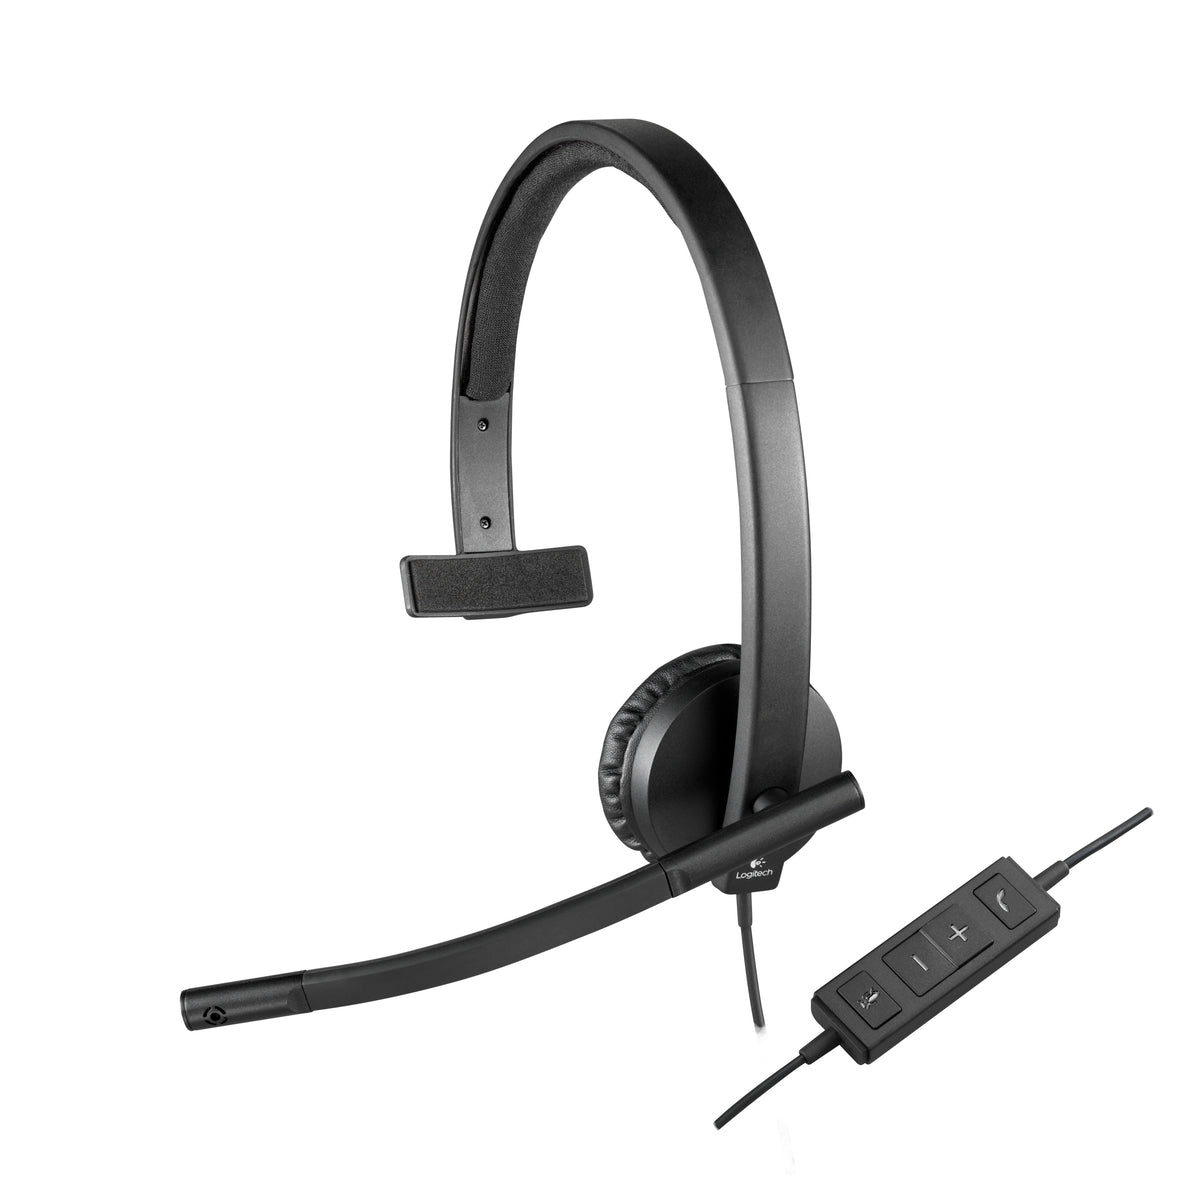 Logitech USB Headset H570e - Headphones - In Ear - With Cable